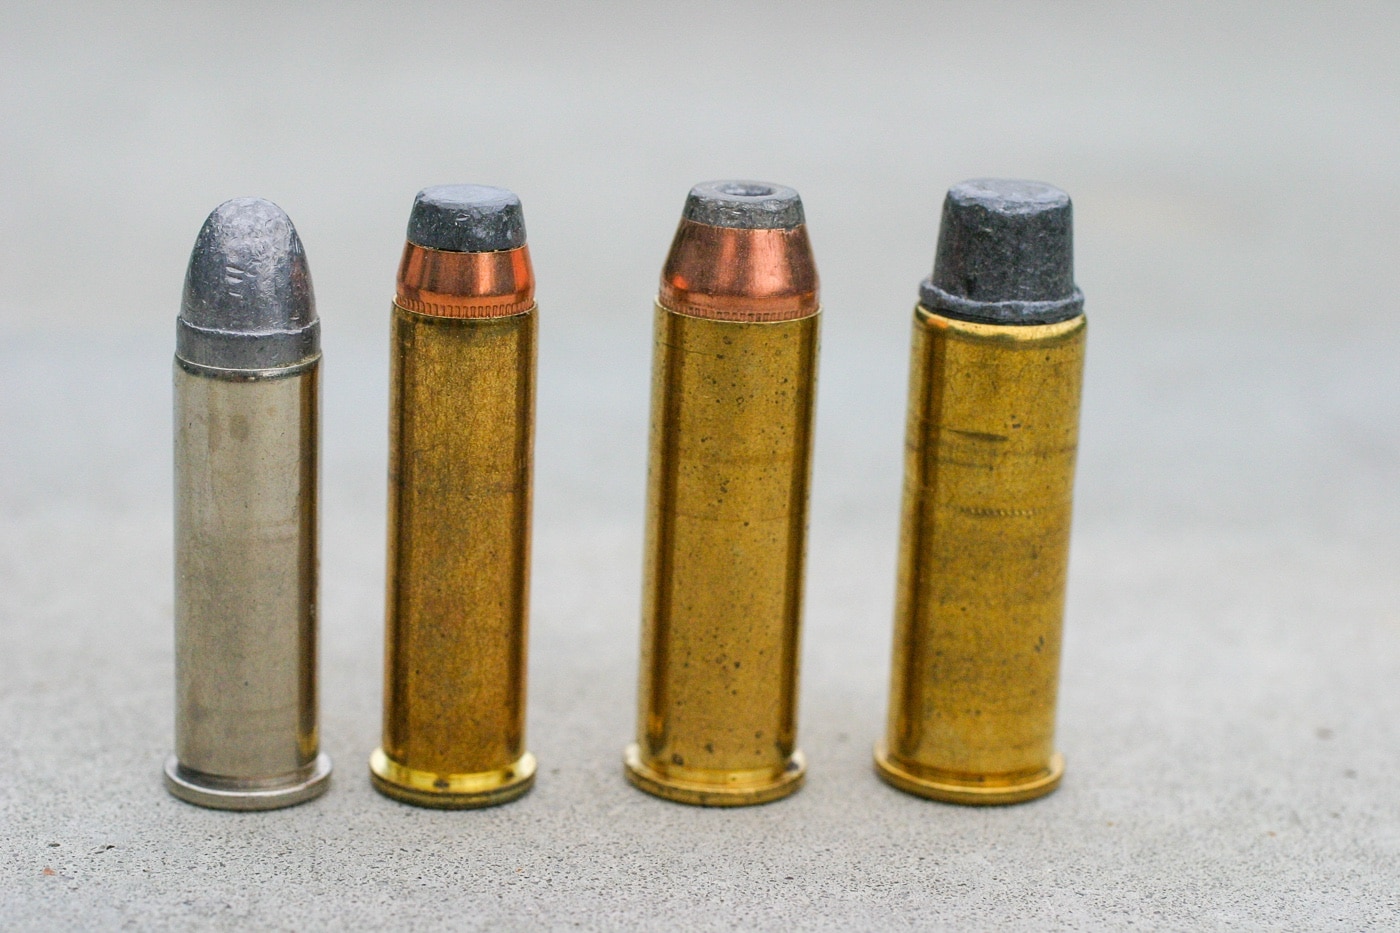 Shown in this digital image are four cartridges for revolvers. Each uses a different projectile which is the point to the illustration. From left to right, they are a lead round nose, semi-jacketed soft point bullet, a semi-jacketed hollow point bullet and a lead semi-wadcutter. A special note about the LSWC bullet - some effective hollow point bullets are made with semi-wadcutters. They have an open front, deep cavity and use soft lead to increase the probability of expansion. 